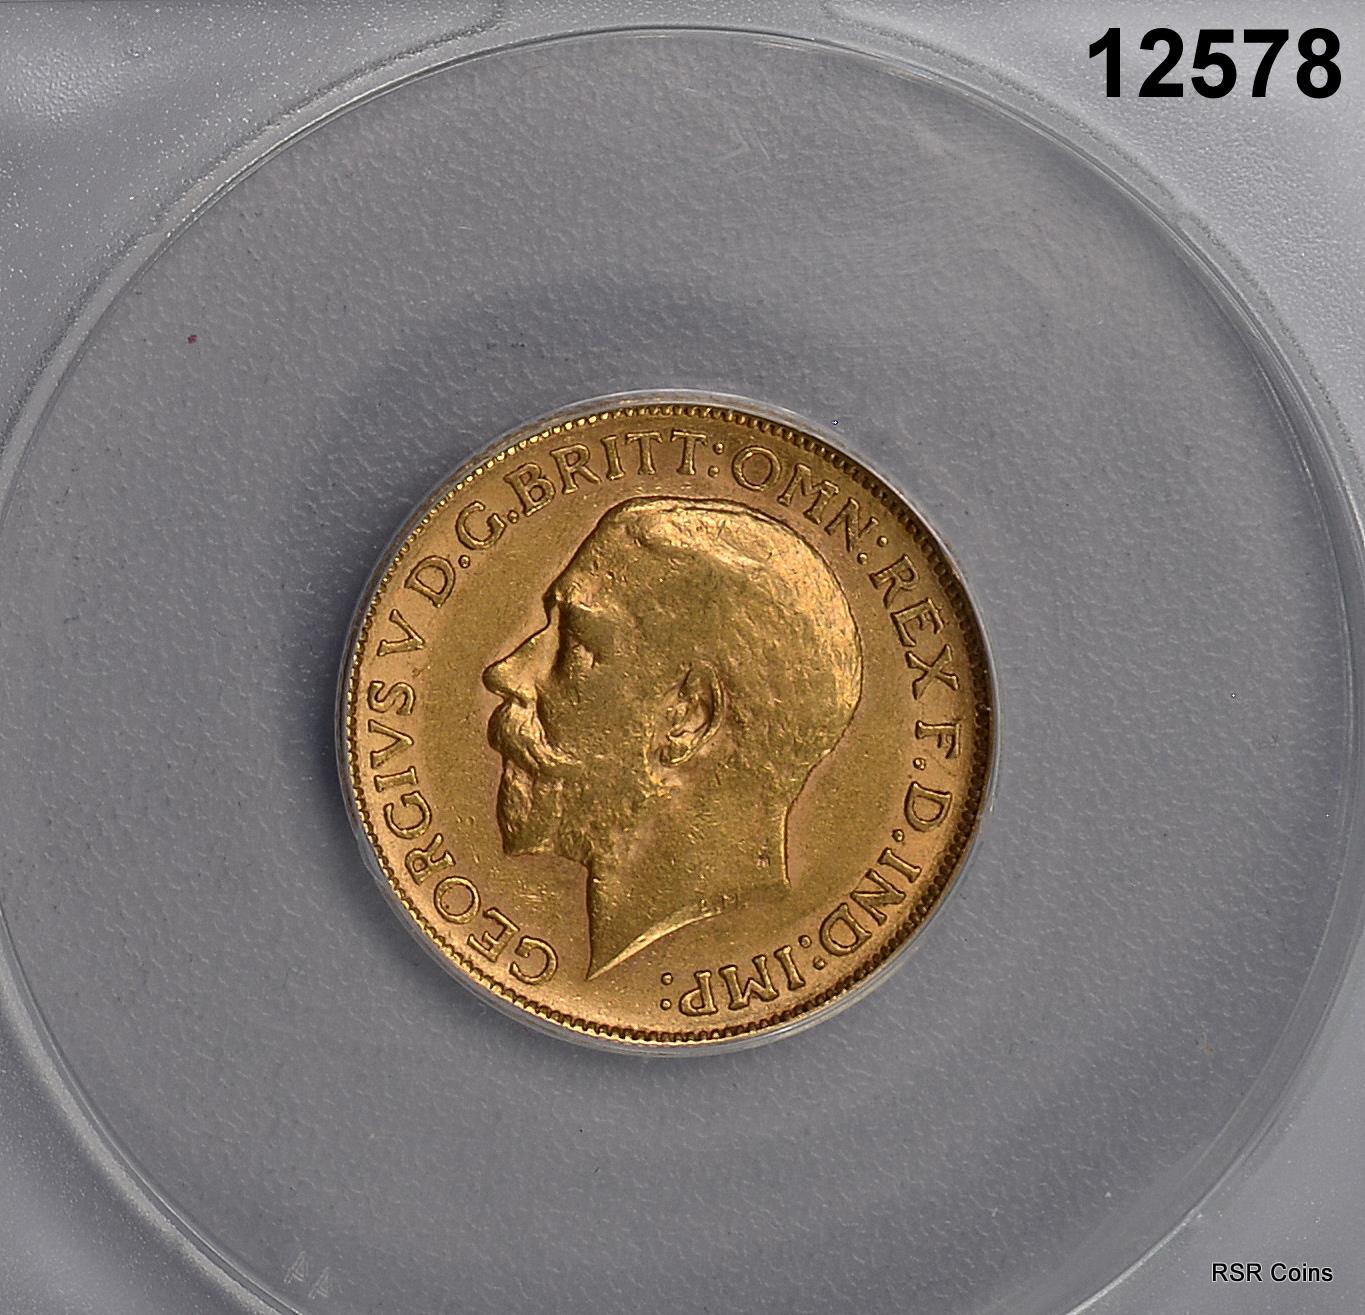 1911 GREAT BRITAIN GOLD SOVEREIGN ANACS CERTIFIED AU55 NICE! #12578